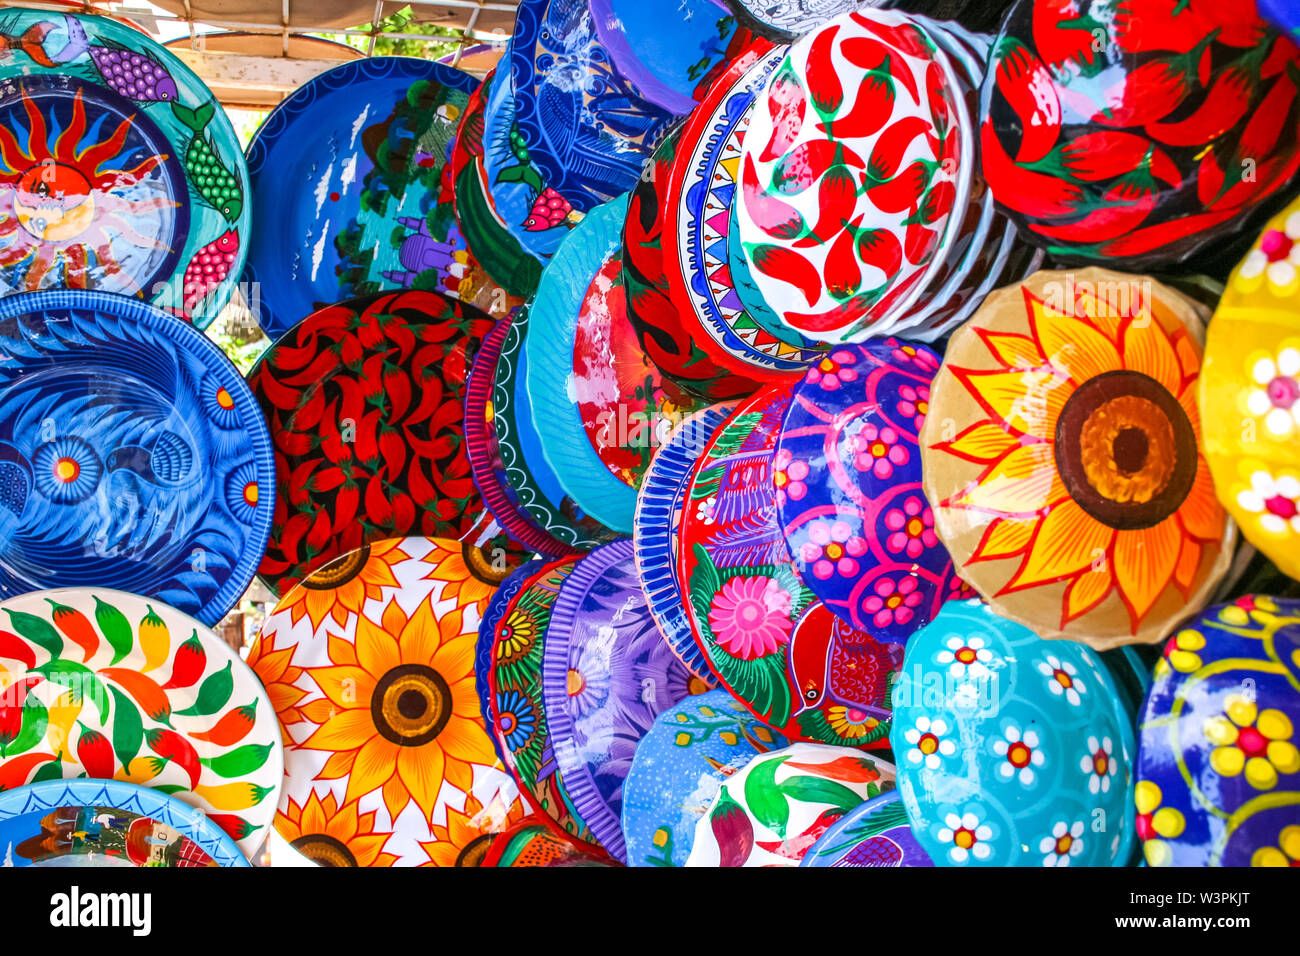 Colorful handmade decorative mexican plates with many patterns on the display on the local market in Puerto Vallarta Stock Photo